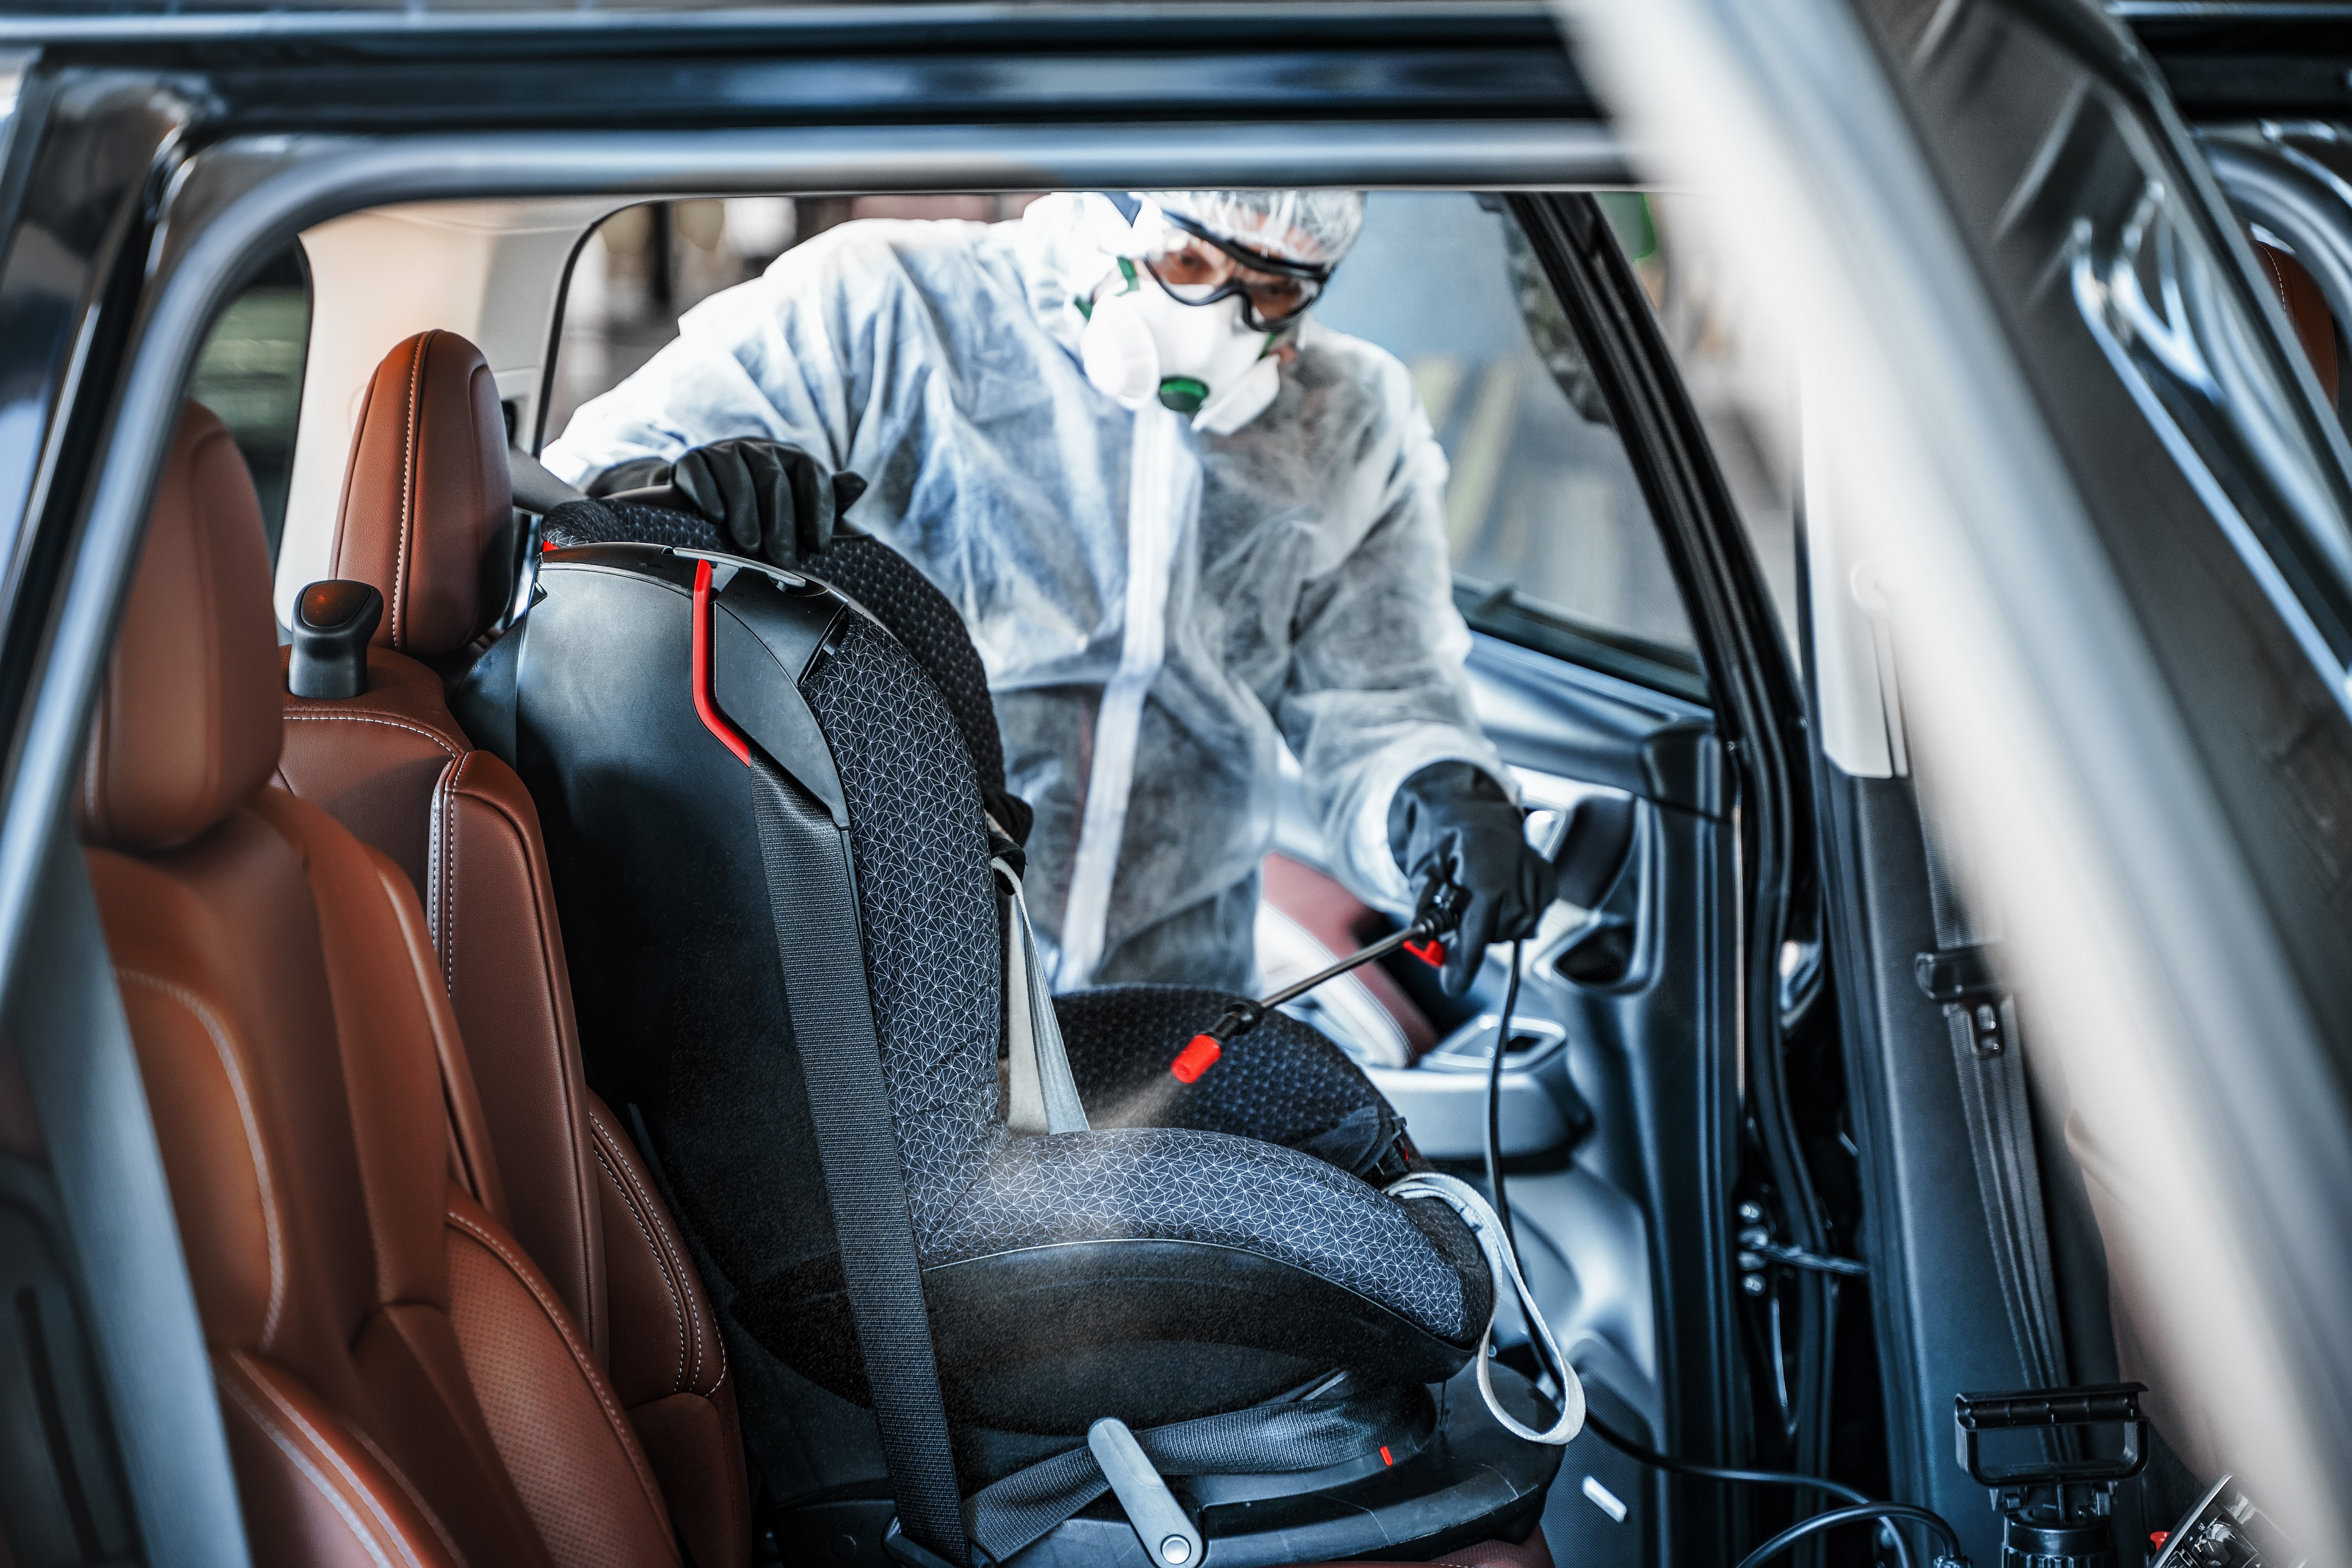 Guy in PPE Spraying Interior of Car at Car Wash